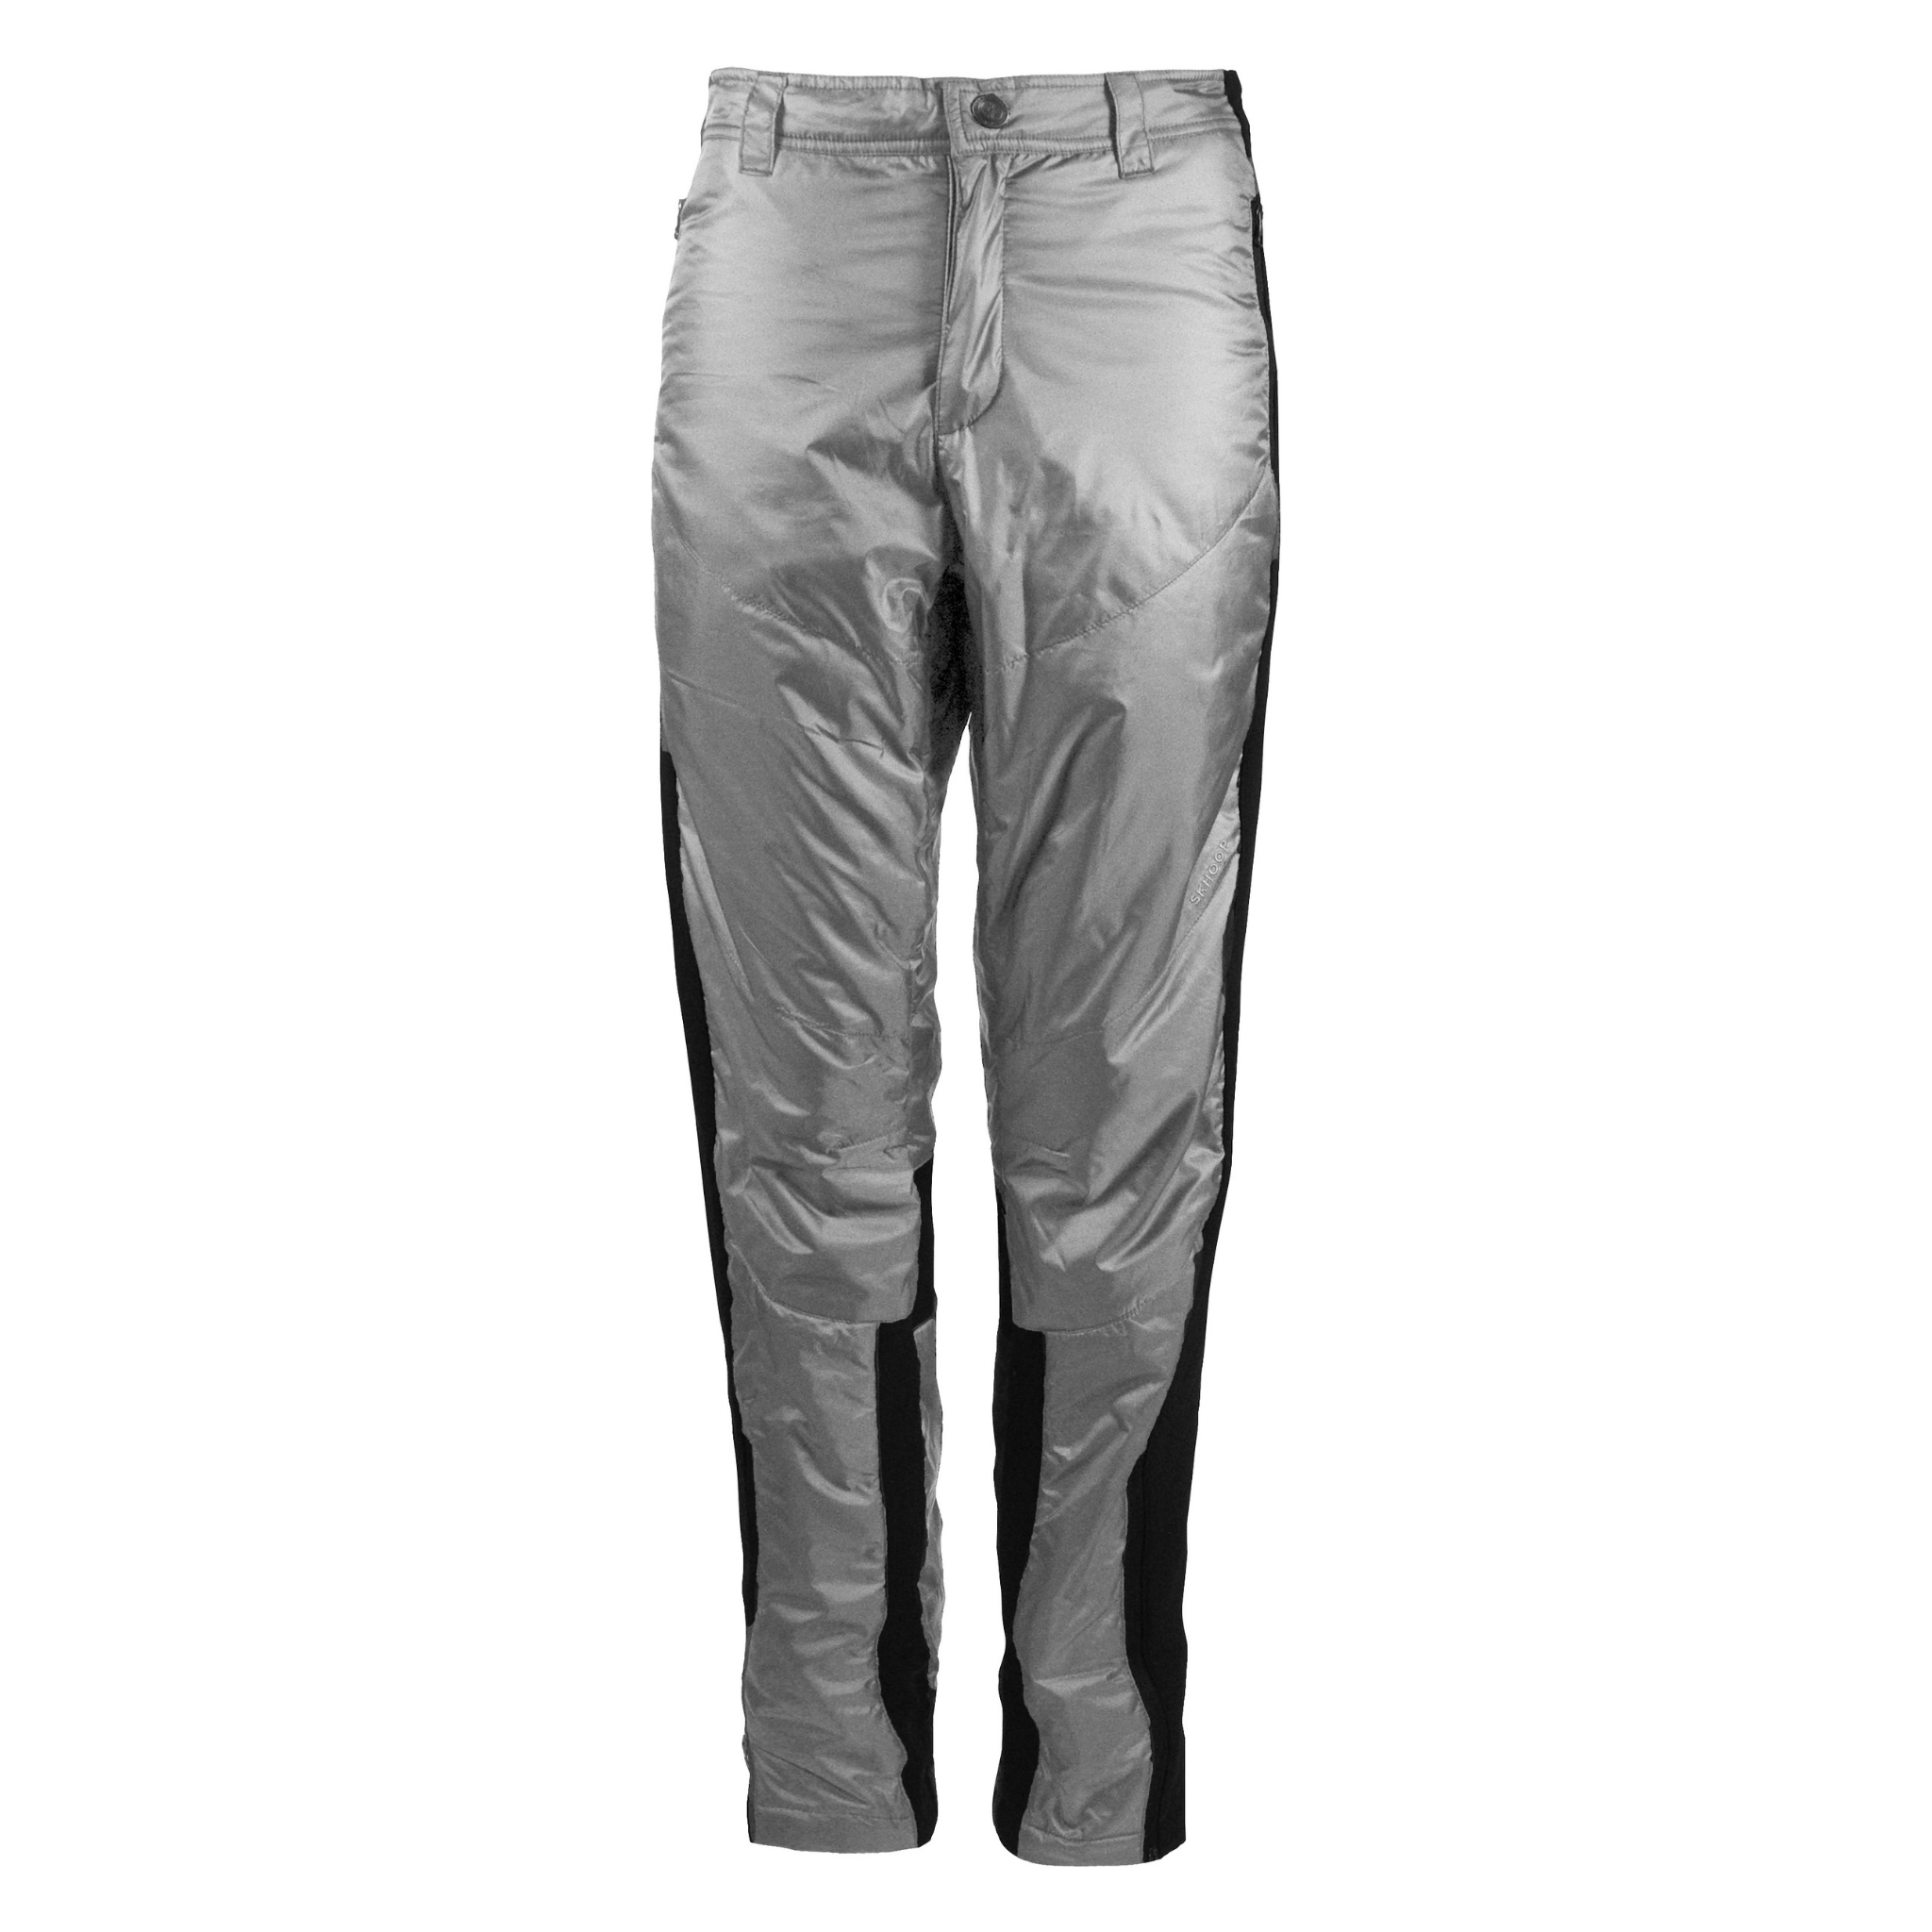 Backcountry Hotpants Insulated Pants, 54% OFF